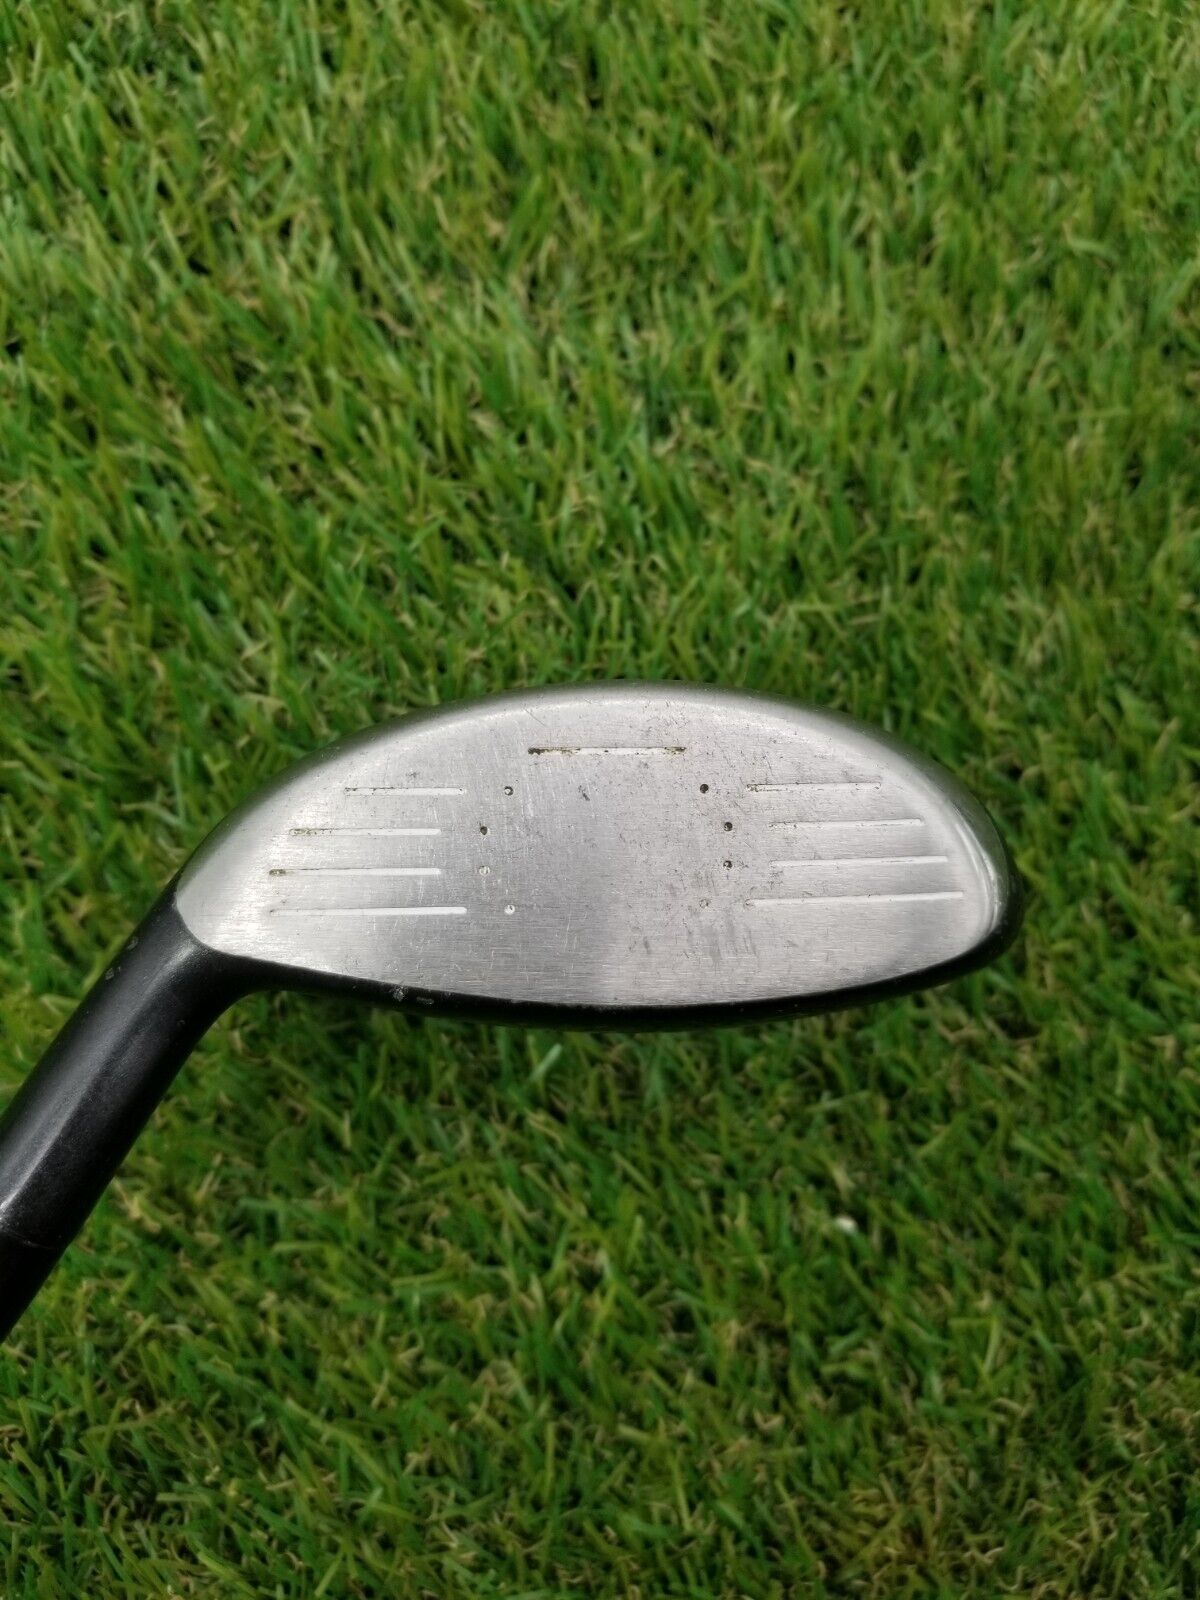 CALLAWAY SOLAIRE 5WOOD LADIES CALLAWAY SOLAIRE GOOD